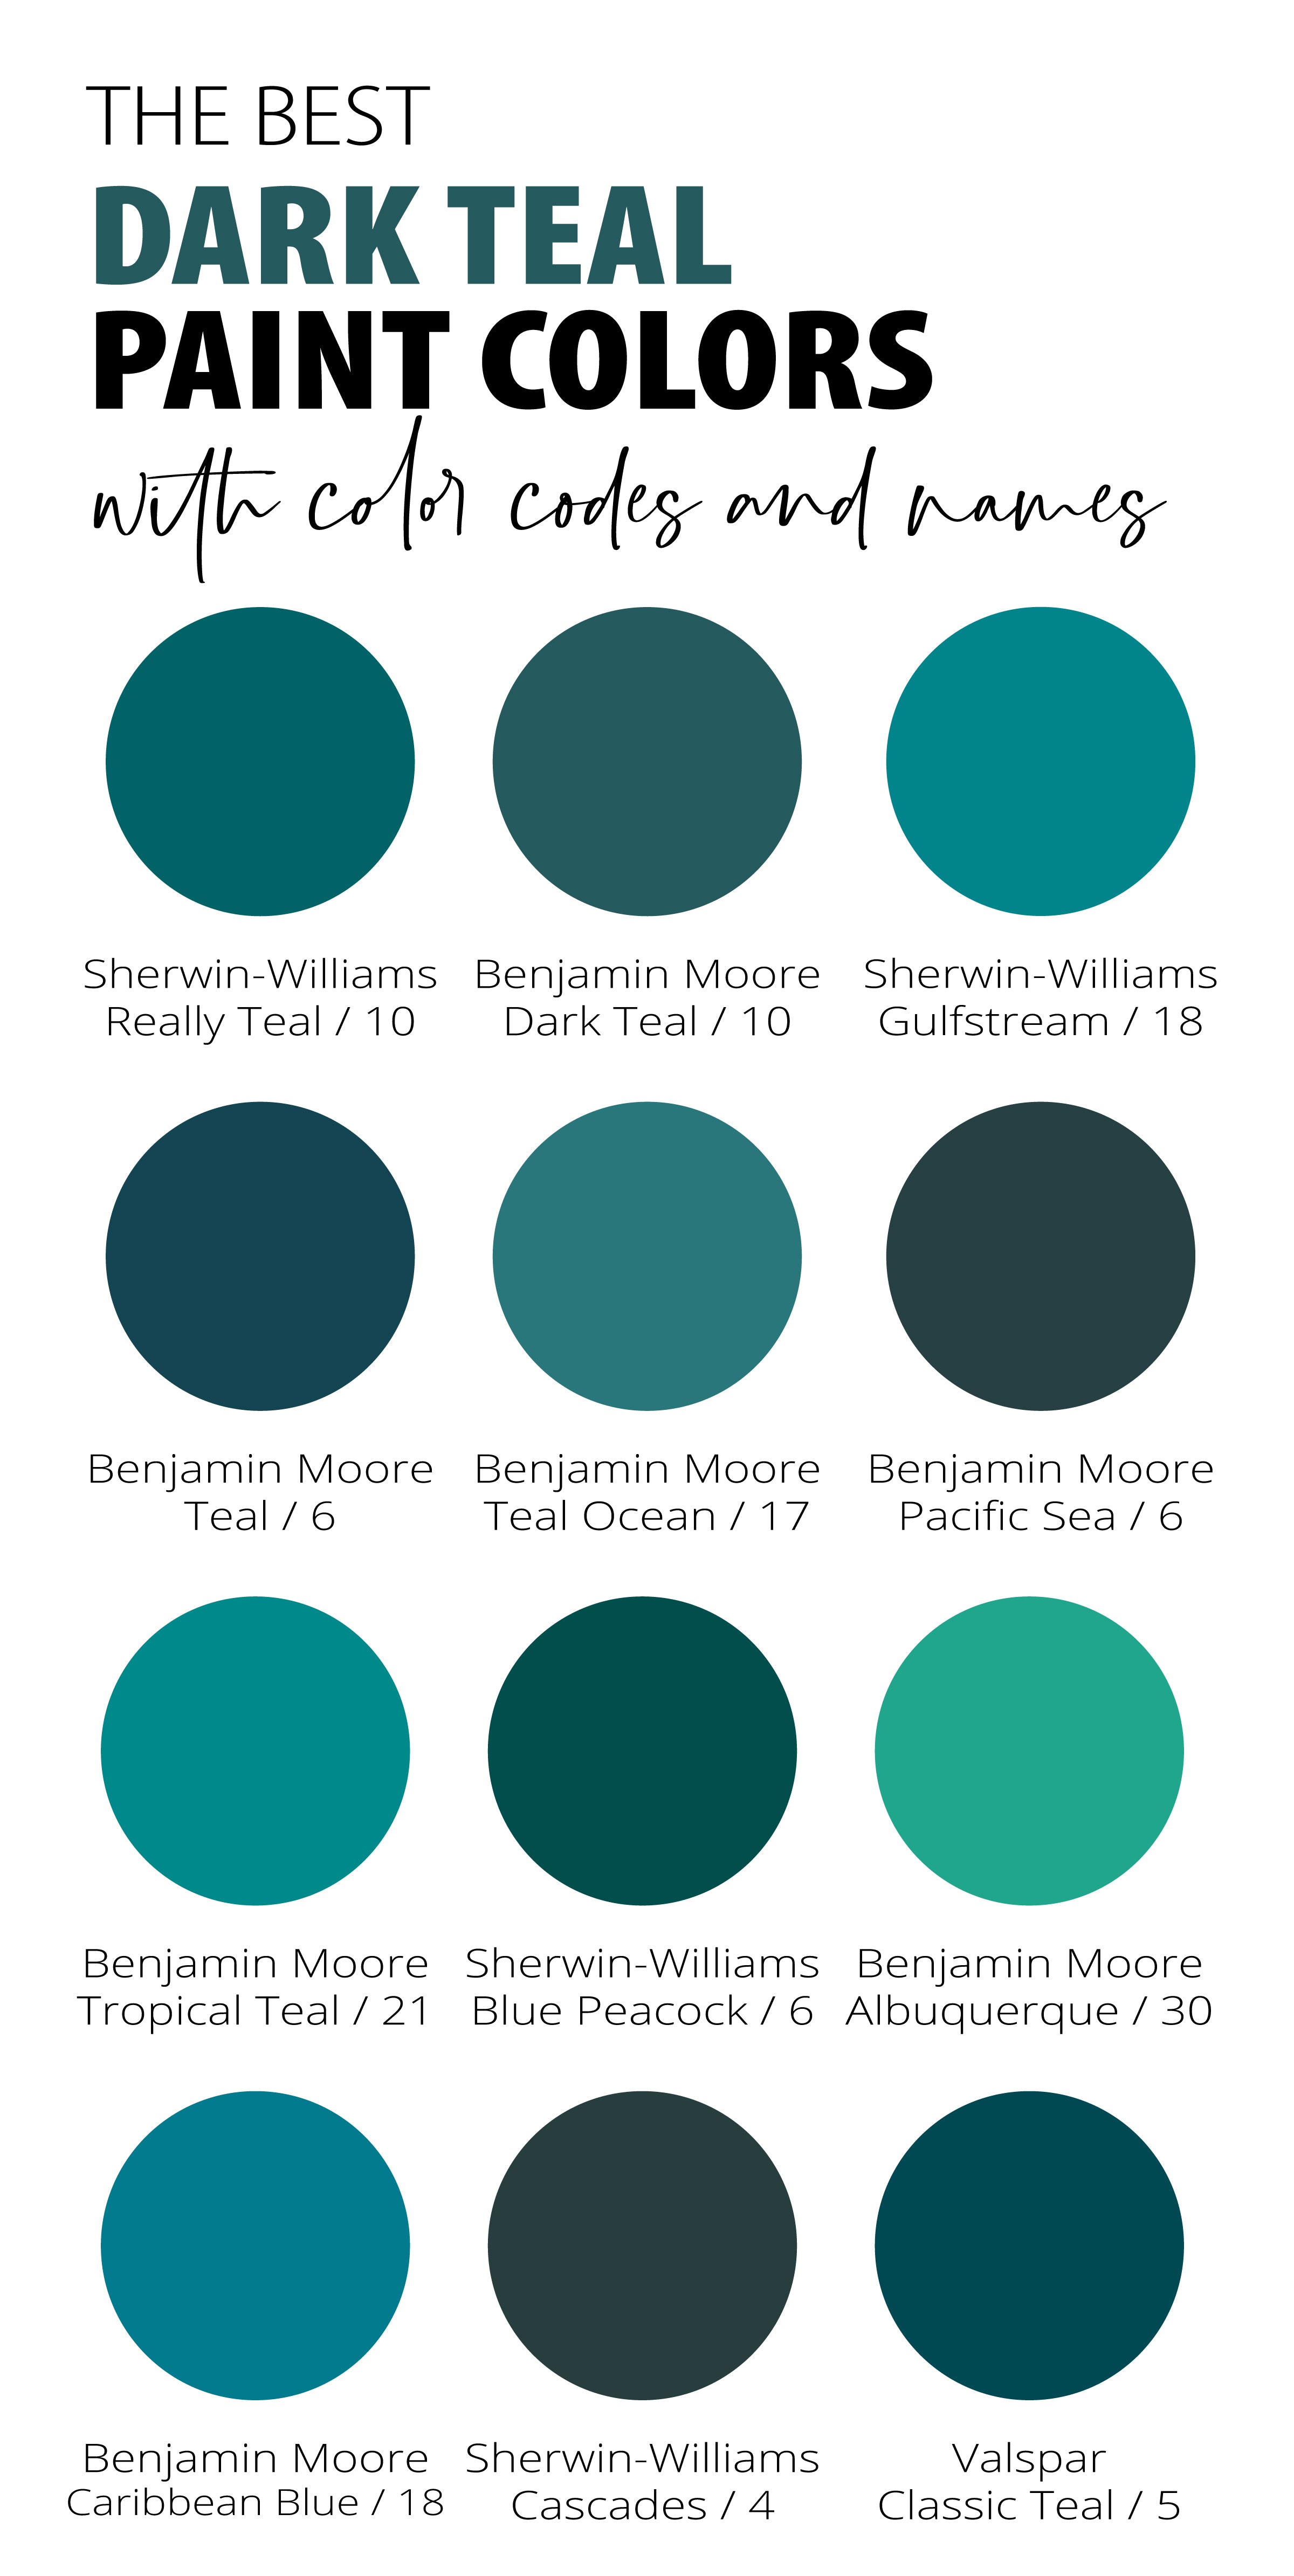 Best-Dark-Teal-Paint-Colors-with-Names-Colors-and-LRV-Values